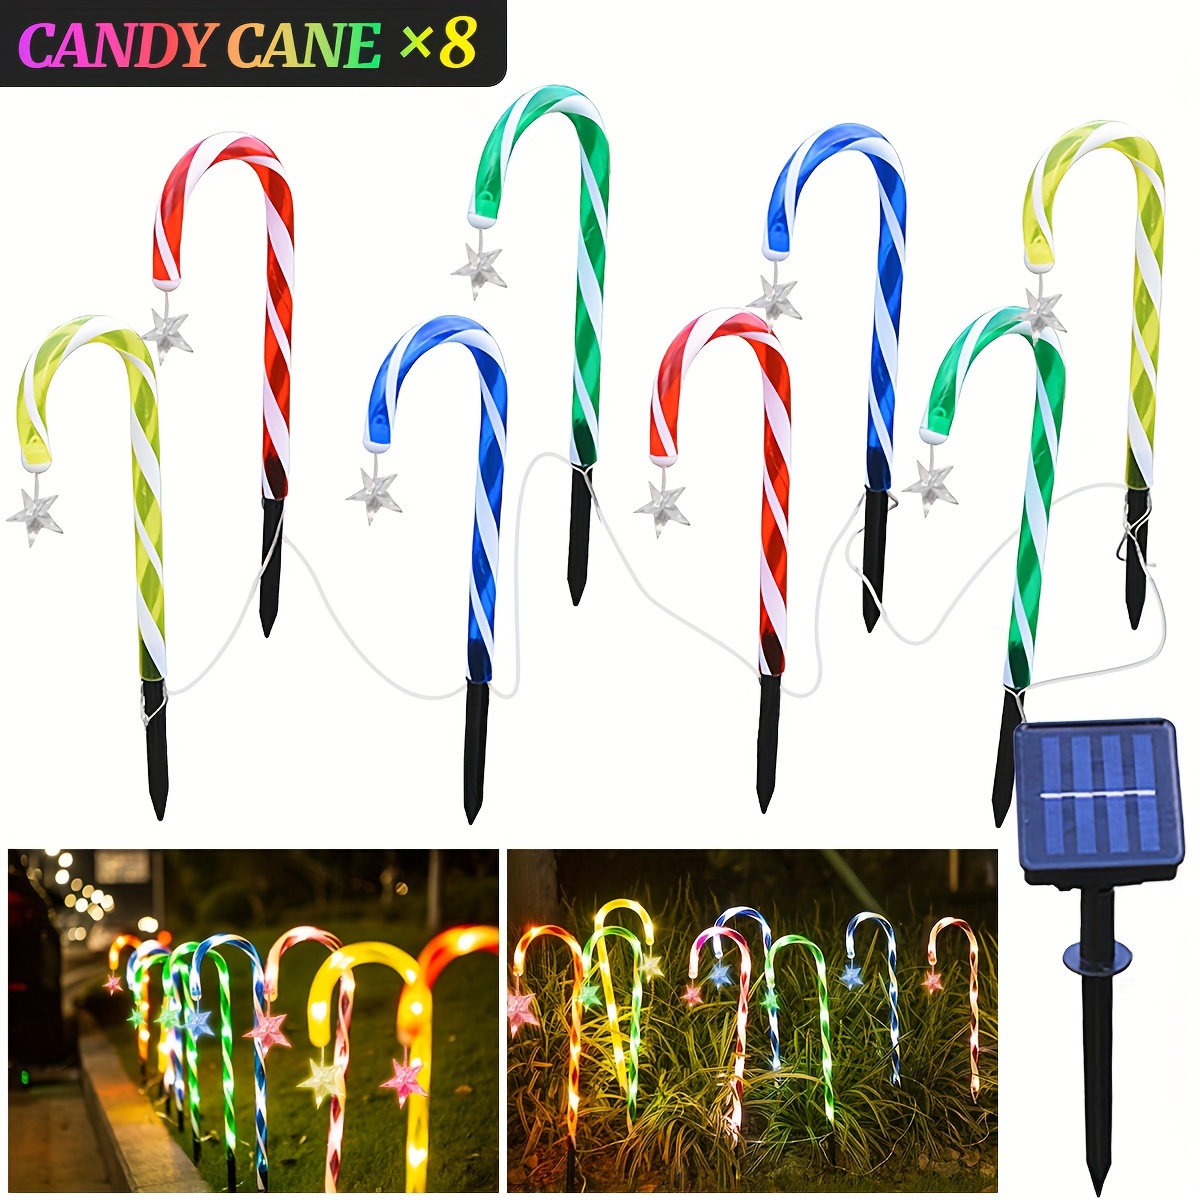 1 Colorful Candy Lamp, Xmas Decor Led Lawn Lamp, Christmas Candy ...